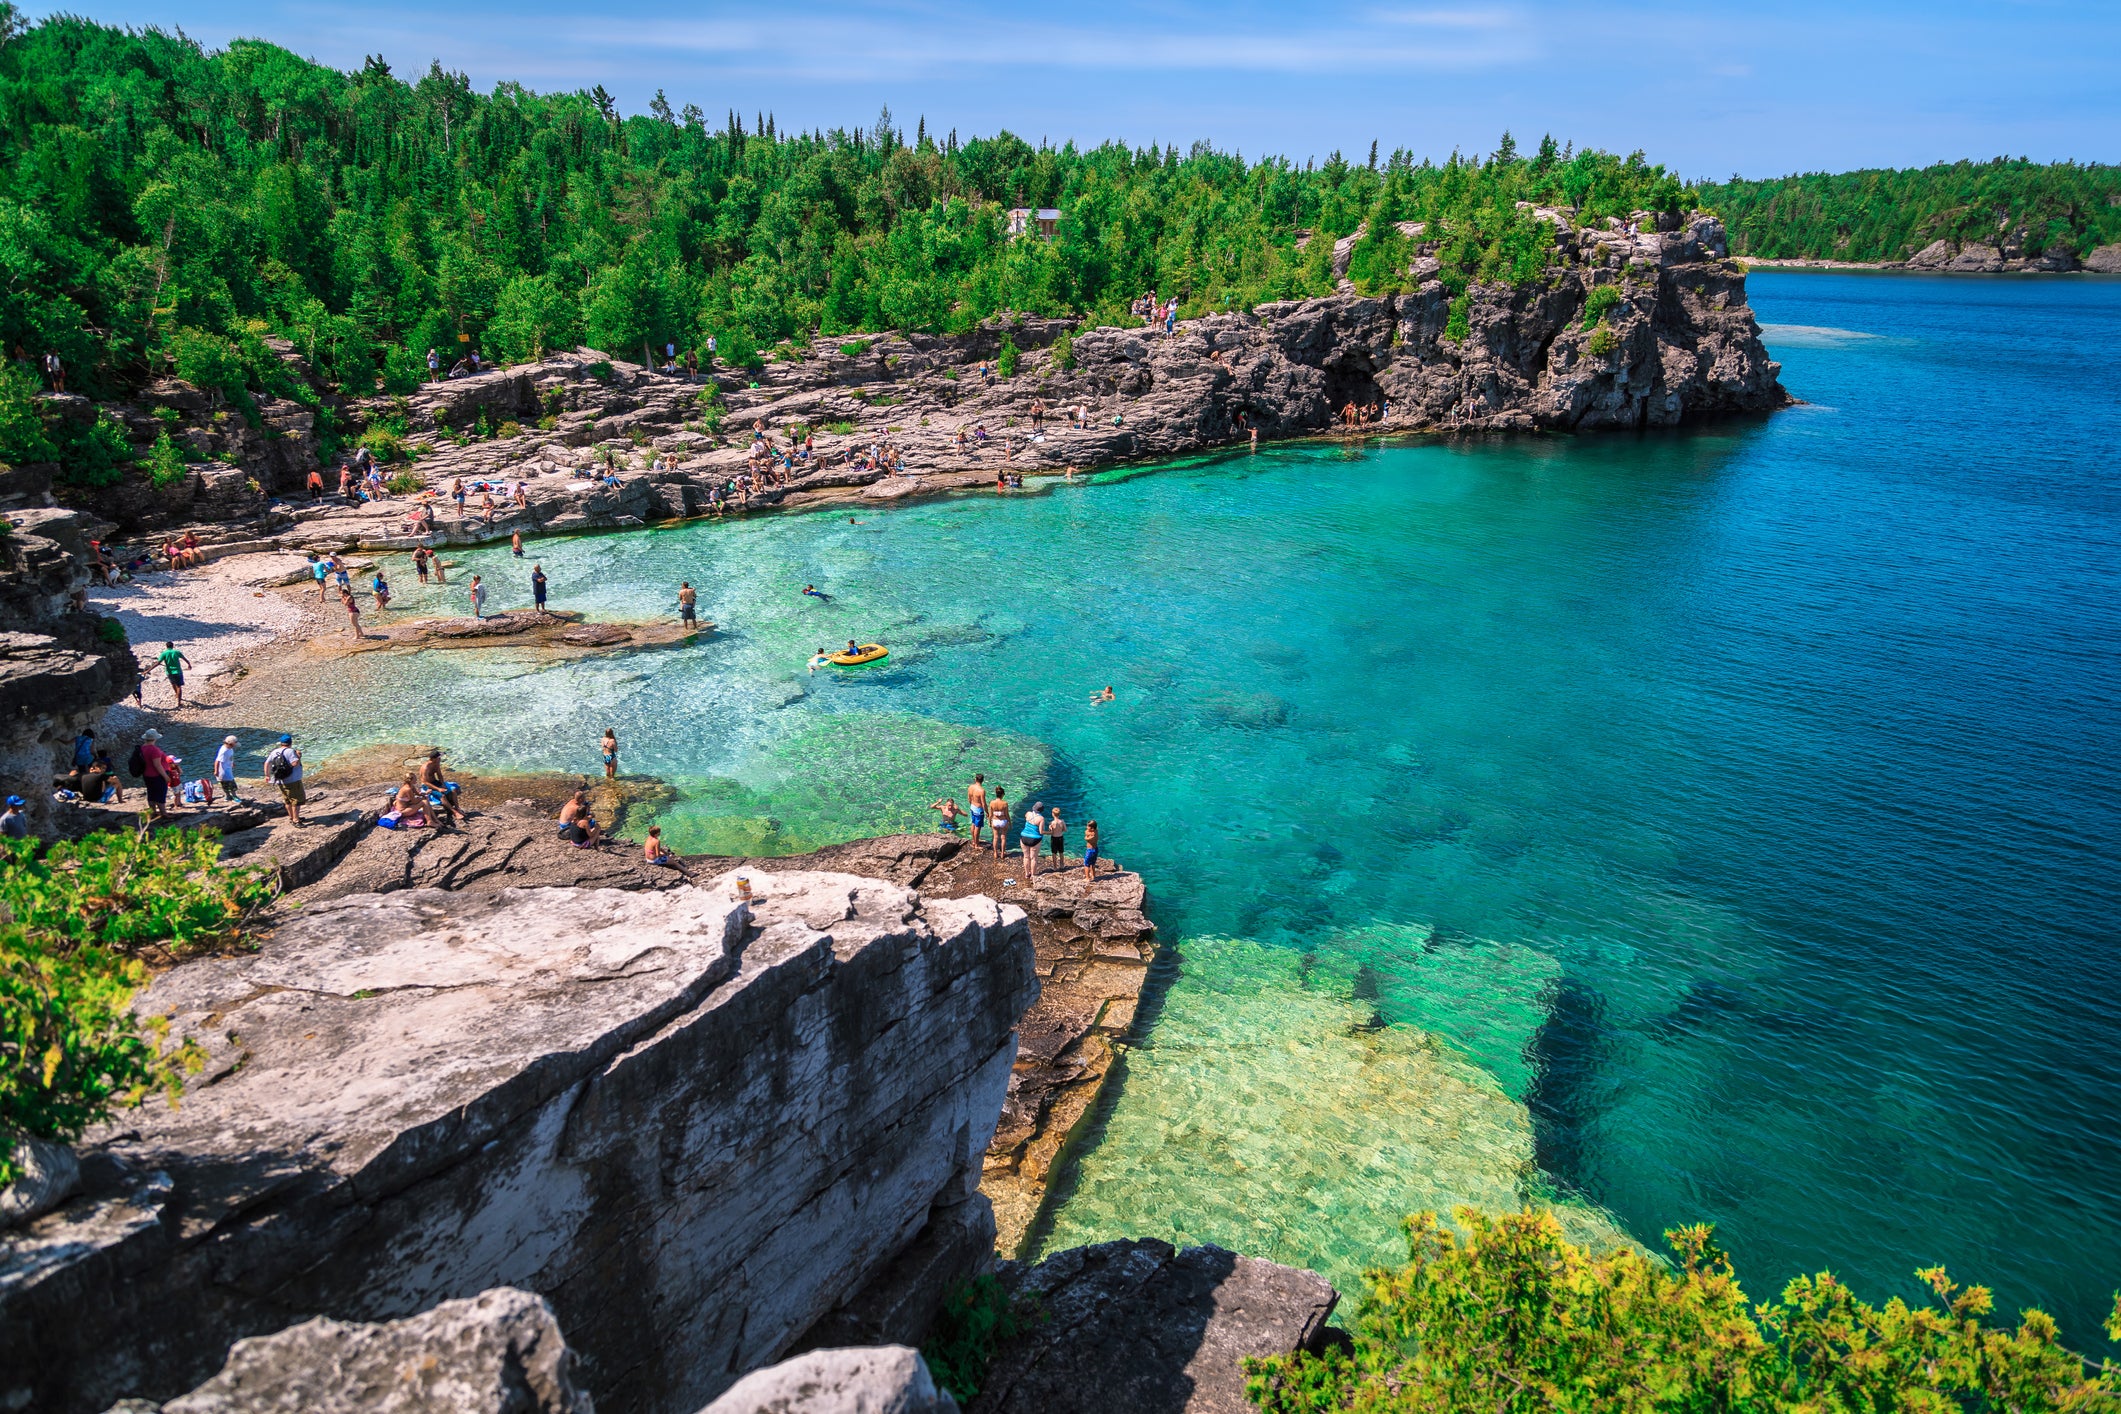 Ontario is filled with unmissable iconic experiences, like a visit to the stunning Lake Huron